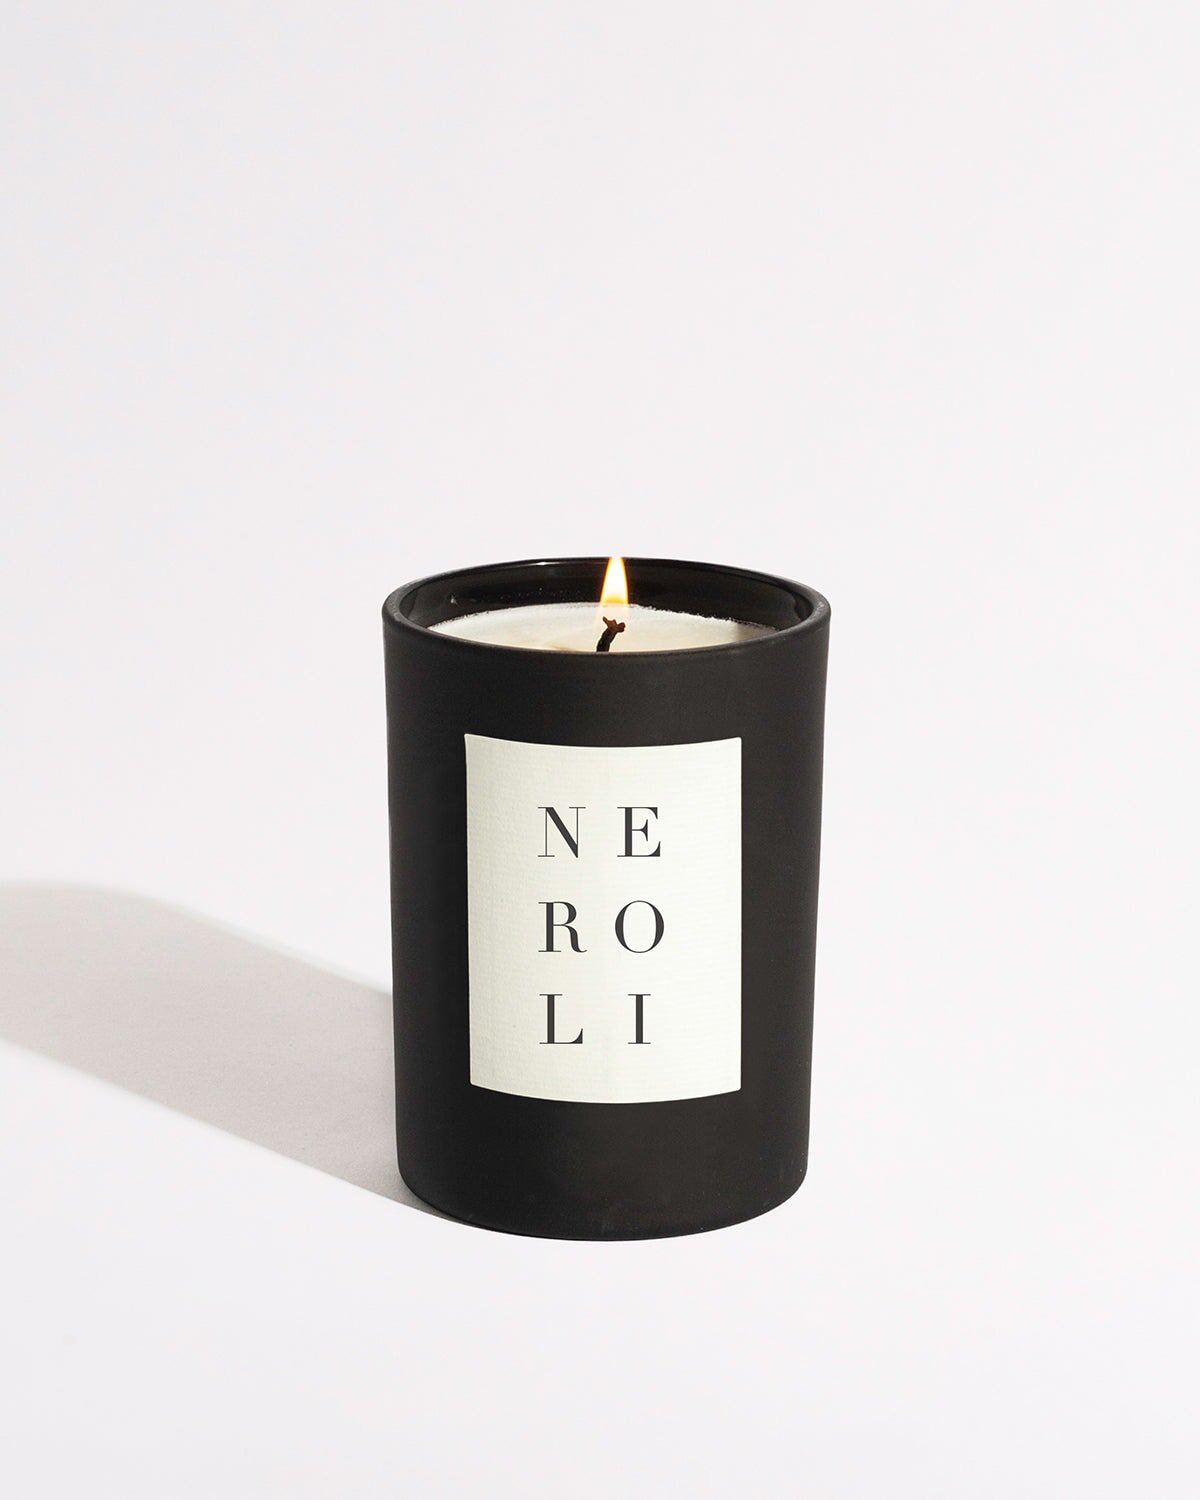 A black Neroli Noir Candle by Brooklyn Candle Studio, adorned with a white label featuring the word "Neroli" written vertically, is lit and casting shadows on a white background. This candle is crafted with premium fragrance oils for an elevated experience.